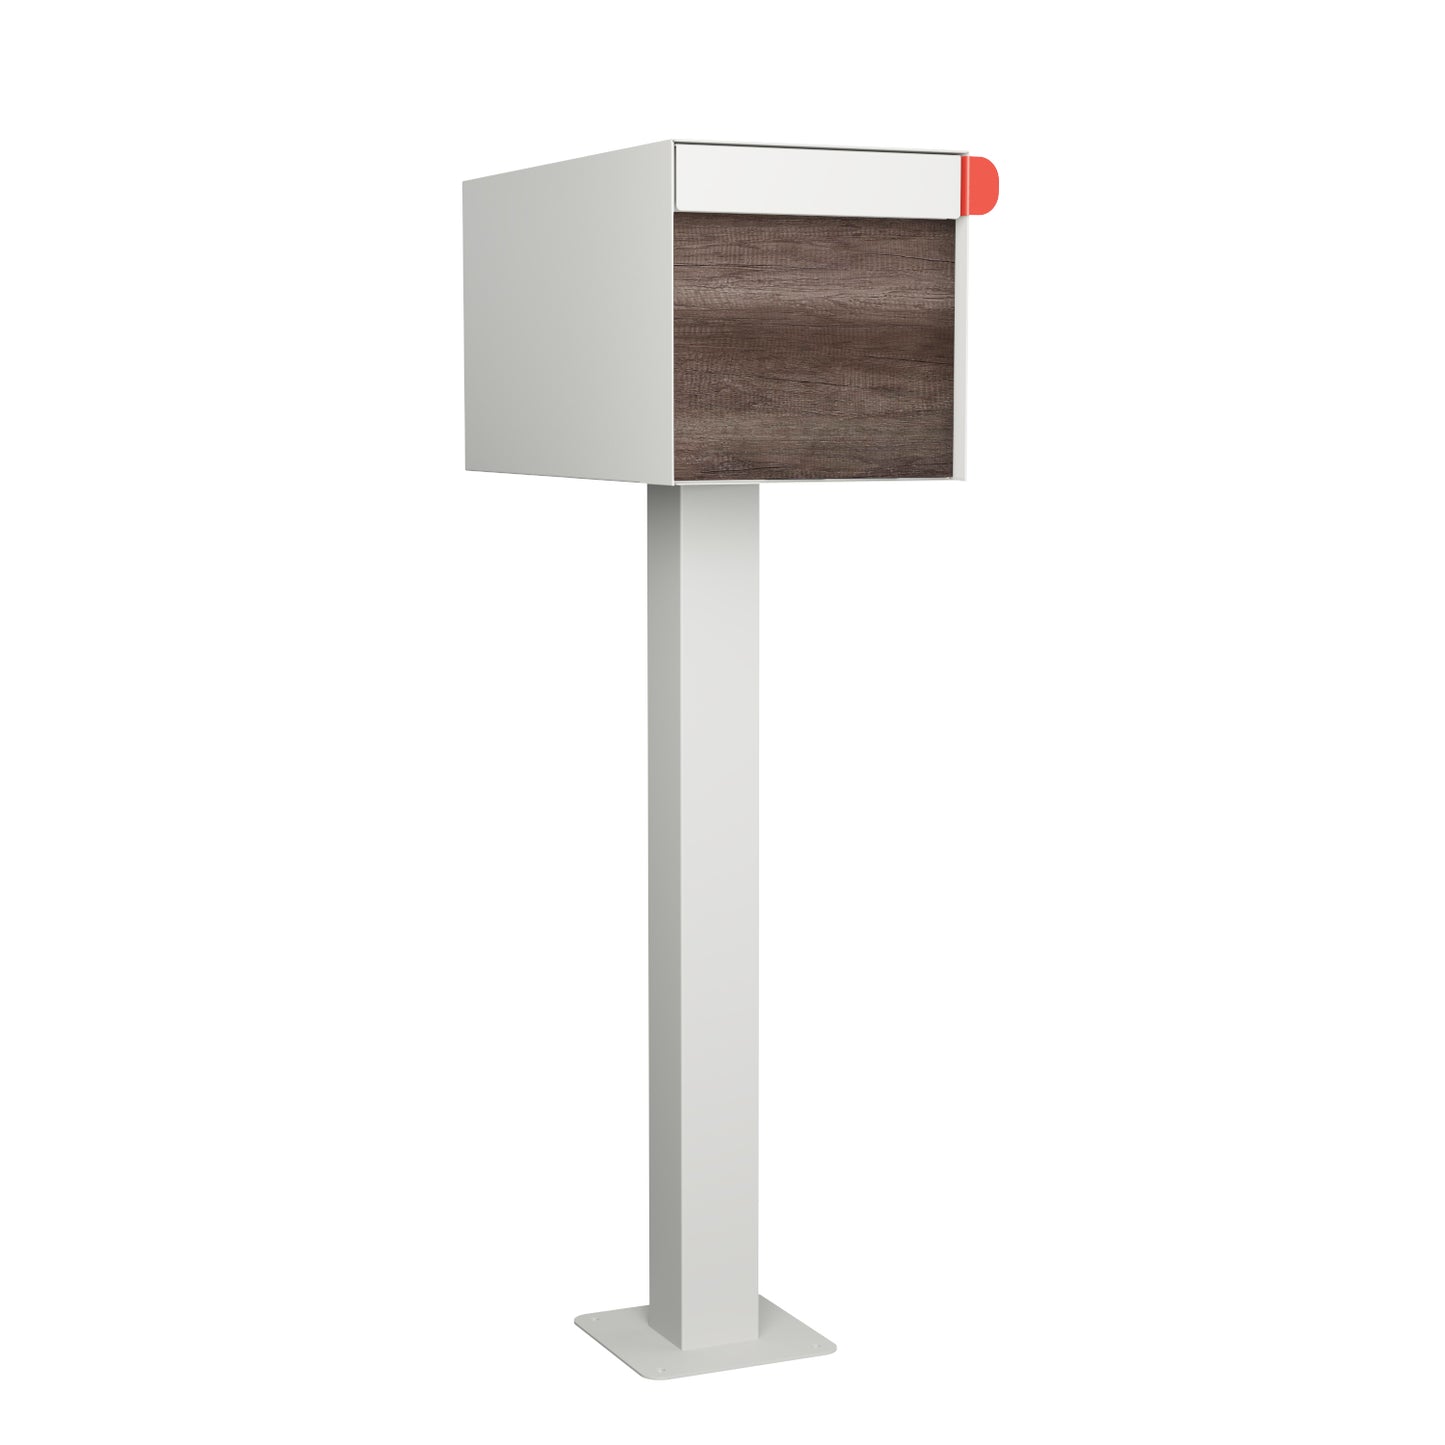 Town Square by Bravios - Large Capacity Mailbox with Post - White with Marshland Oak Wood Panel